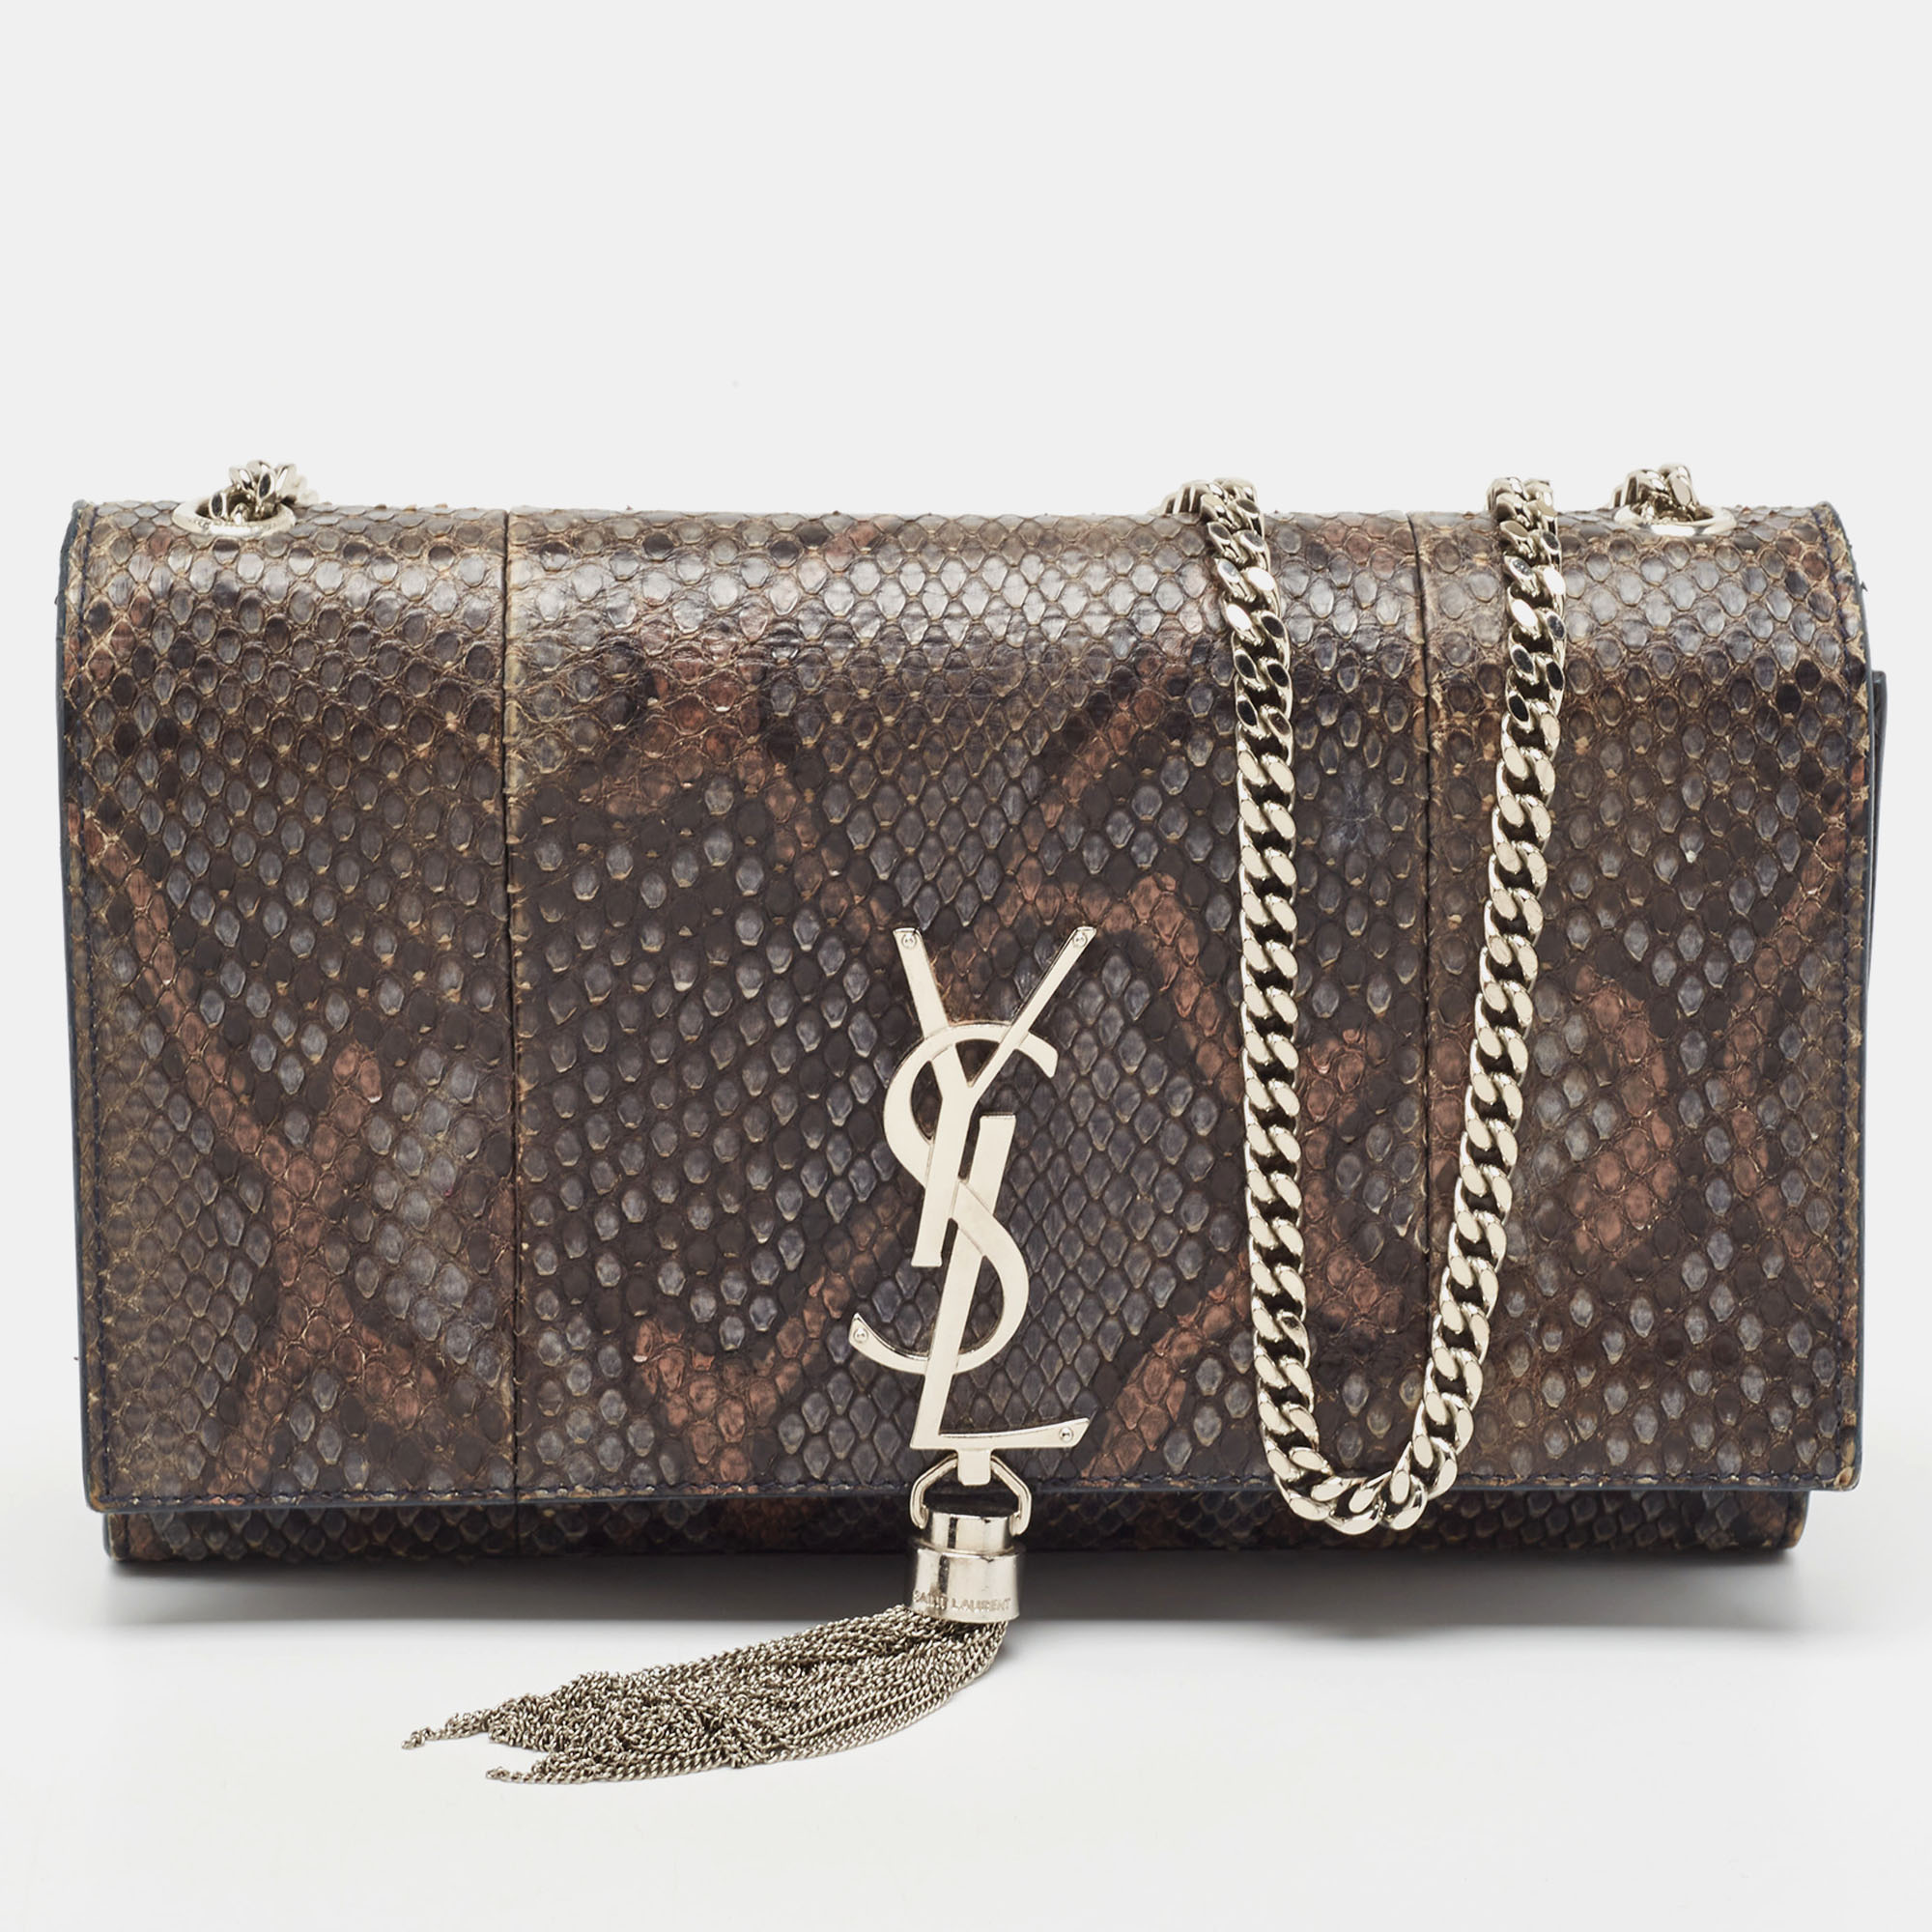 Meticulously crafted from python leather this Saint Laurent Kate bag exudes just the right amount of sophistication. The bag features a sturdy silver tone shoulder chain the YSL logo with a tassel on the front flap and a leather lined compartment to store all your essentials. Carry this stunner wherever you go and make heads turn